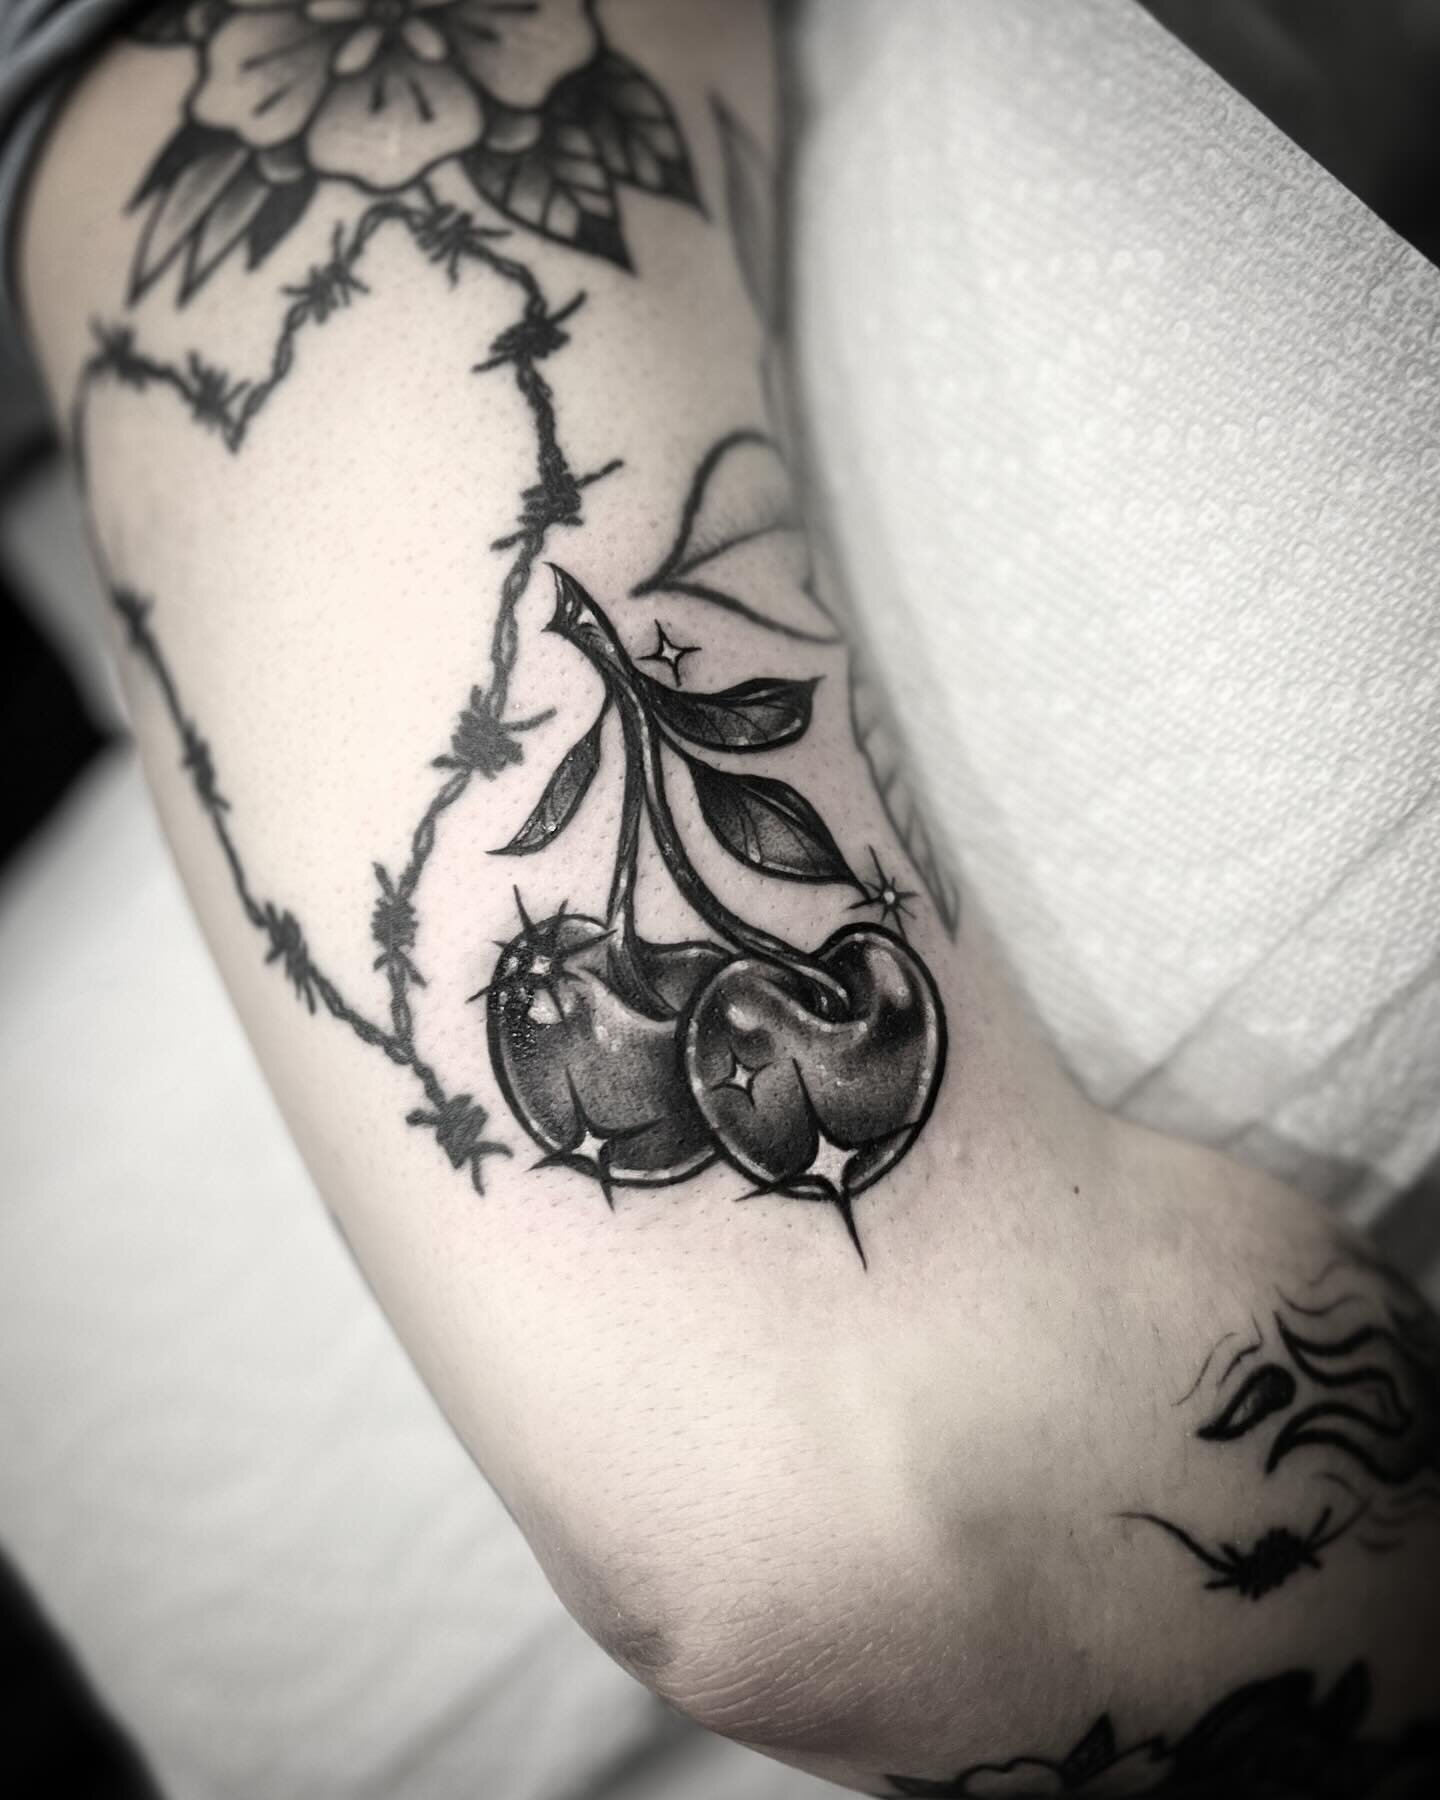 some cool drawn-on cherries I made a couple months ago 🍒✨ 
.
.
.
.
.
.
.
.
#tattoo #freehand #tattoosofinstagram #girlswithtattoos  @jerseydeviltattooshop